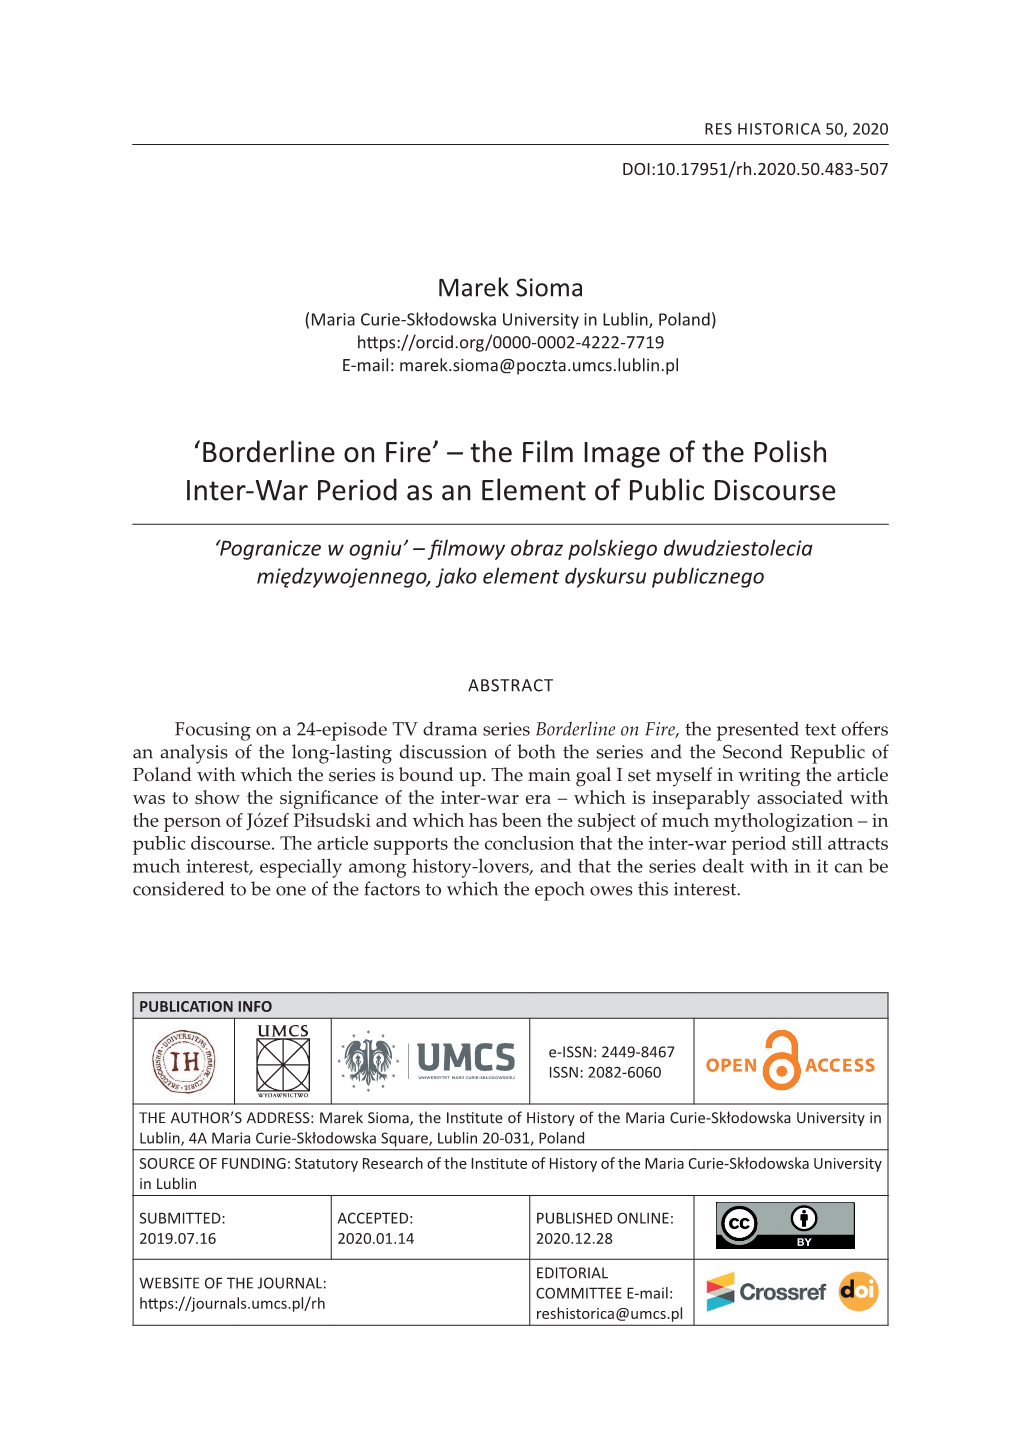 'Borderline on Fire' – the Film Image of the Polish Inter-War Period As An